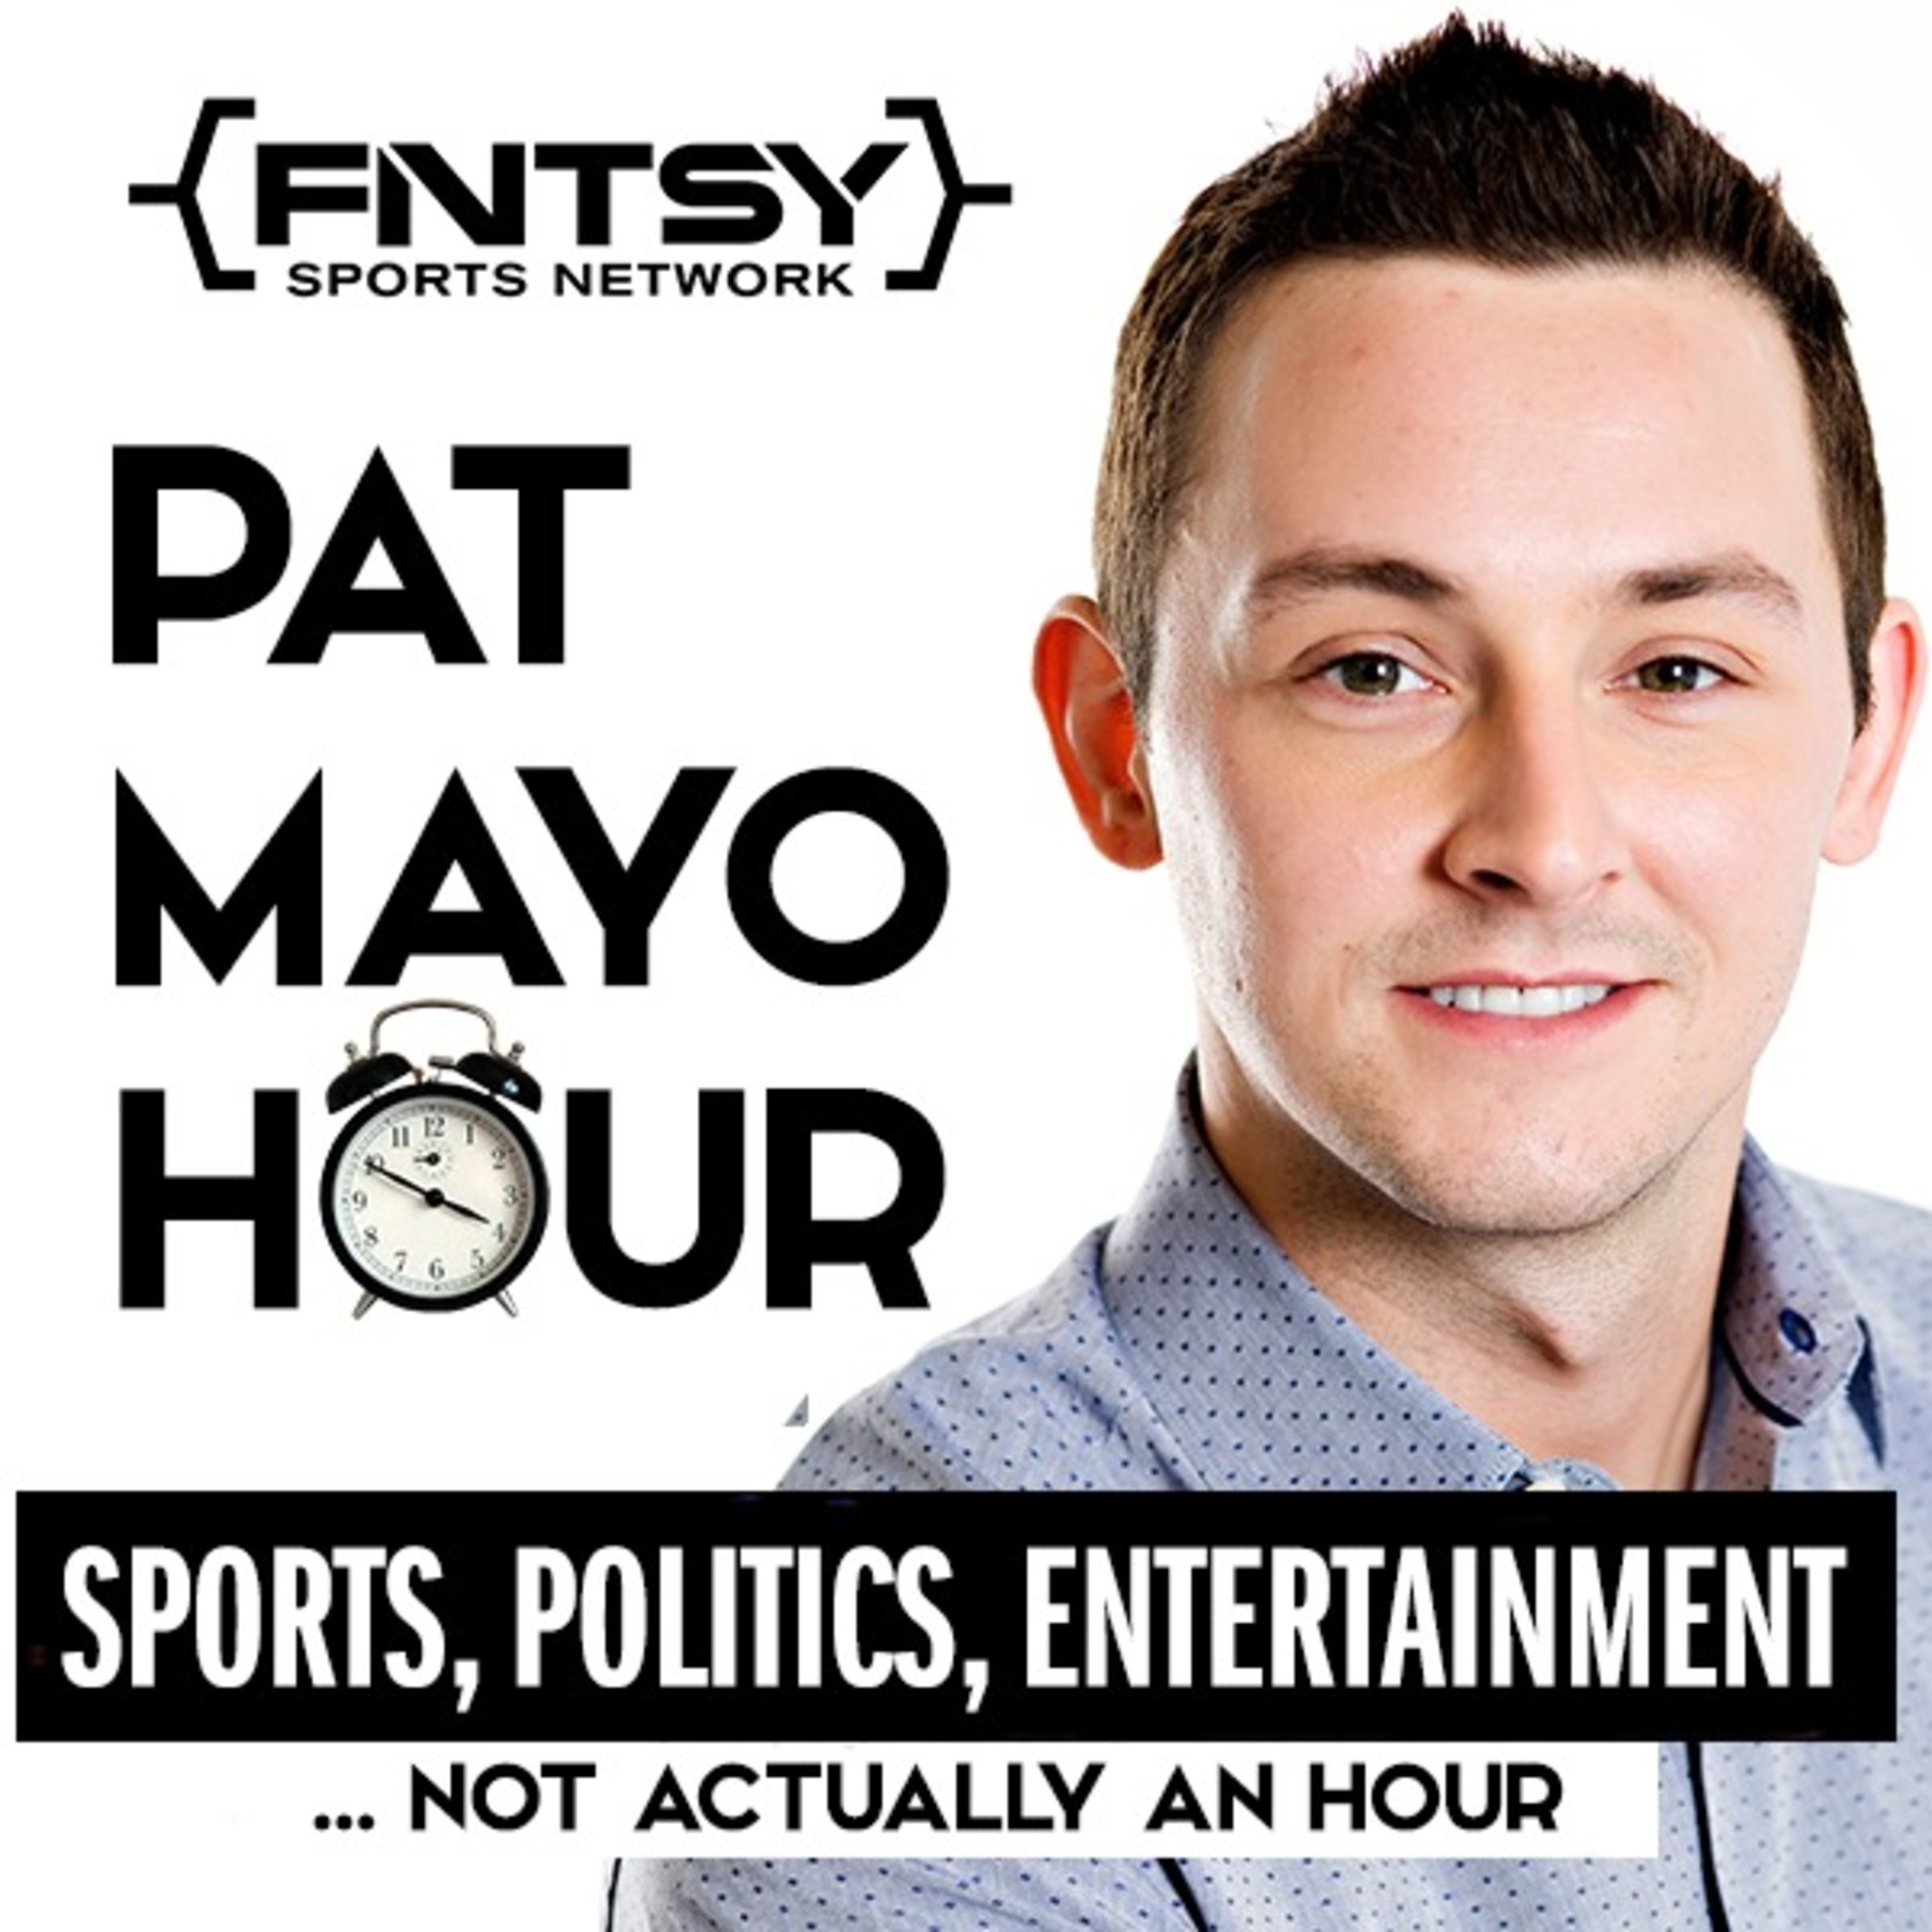 Pat Mayo Hour Listen Free on Castbox.